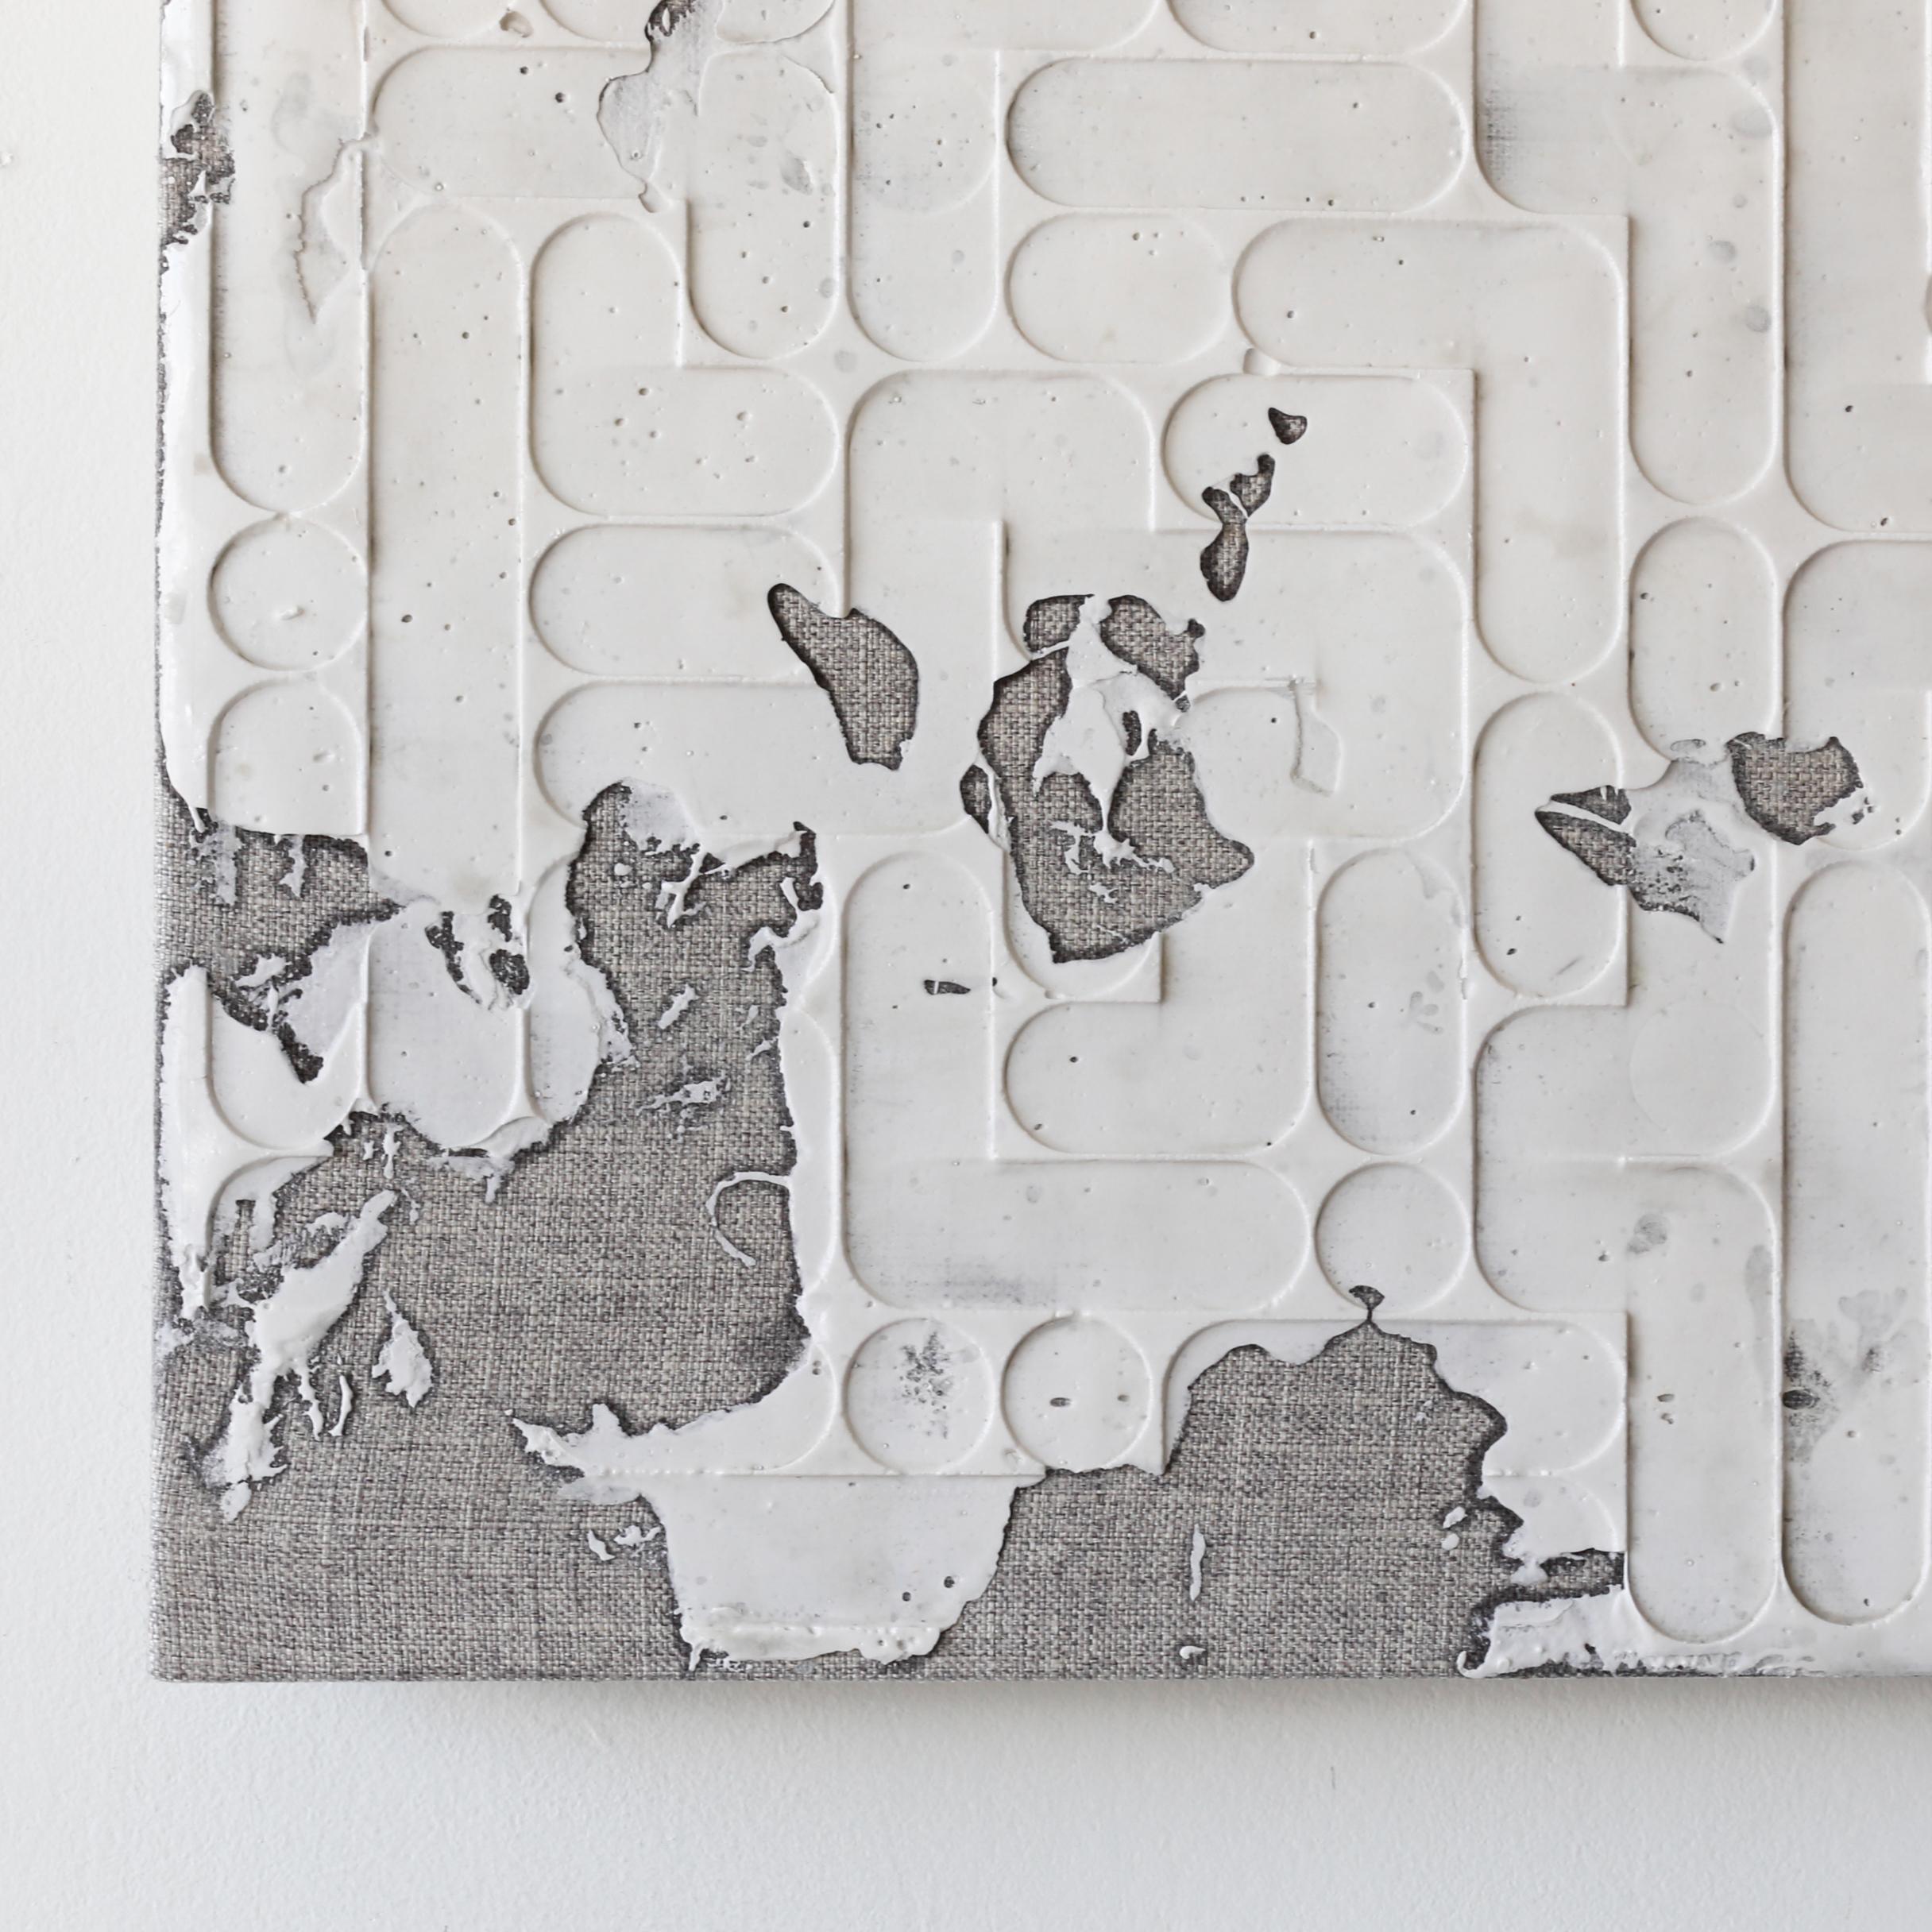 
Alan Alldredge

PERPLEXUM
Taking cues from the natural world, he aims to reinforce the belief that beauty is part of the sacred through his work. 

cast plaster on cotton duck
48.00 X 48.00 in
$3,900.00